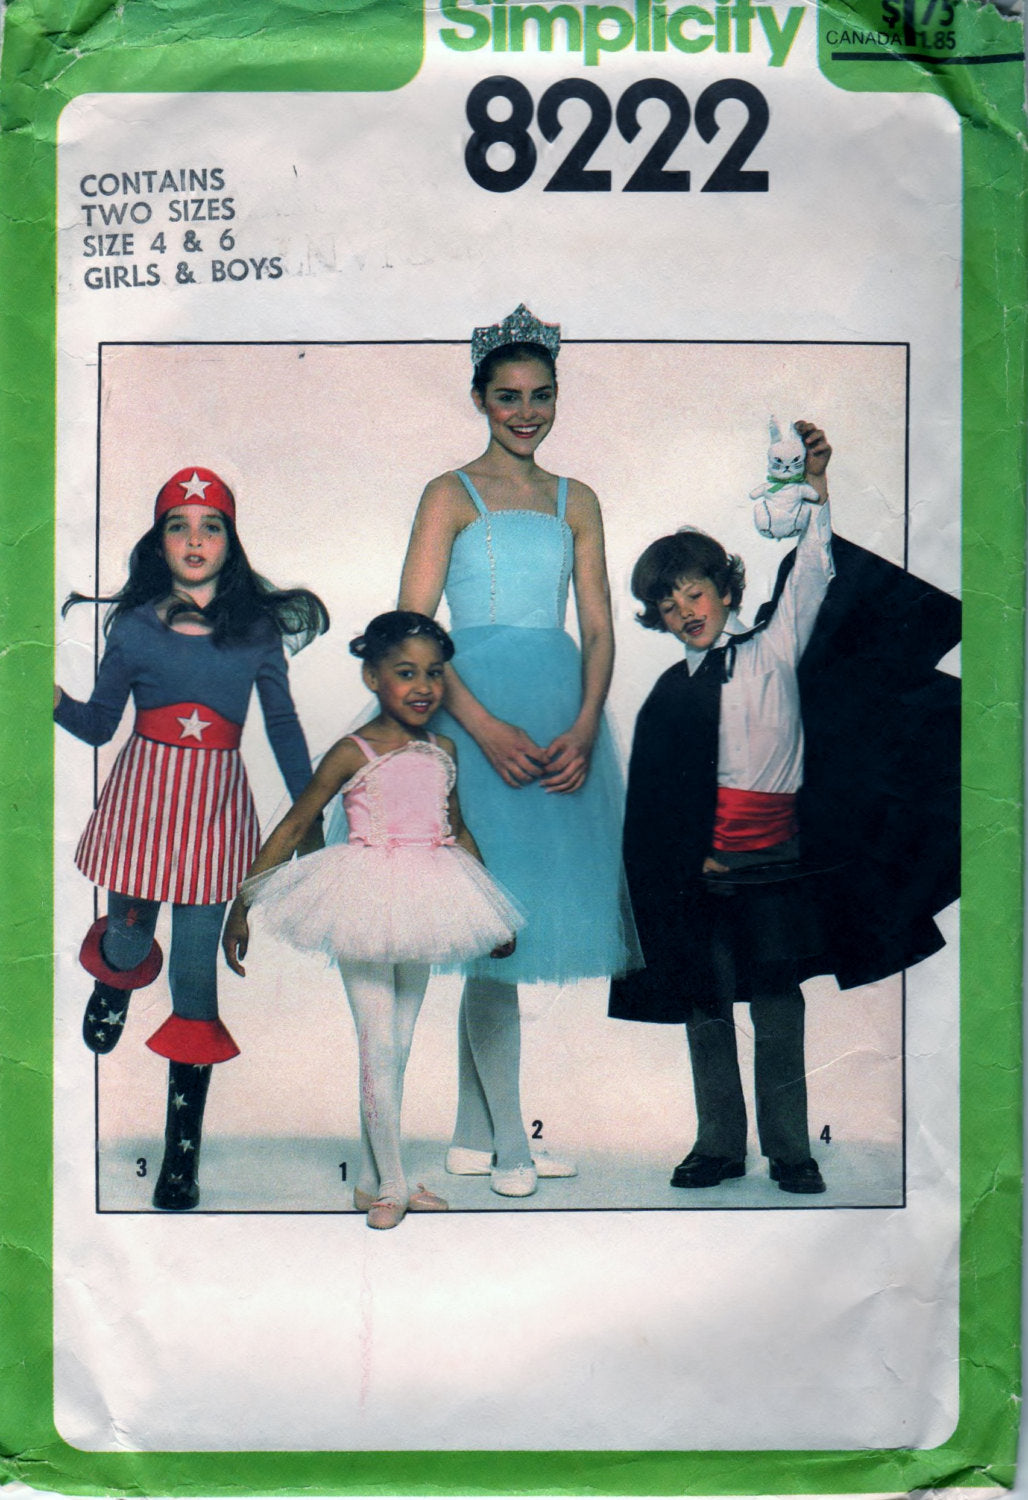 Simplicity 8222 Pattern Vintage Girls and Boys Costumes